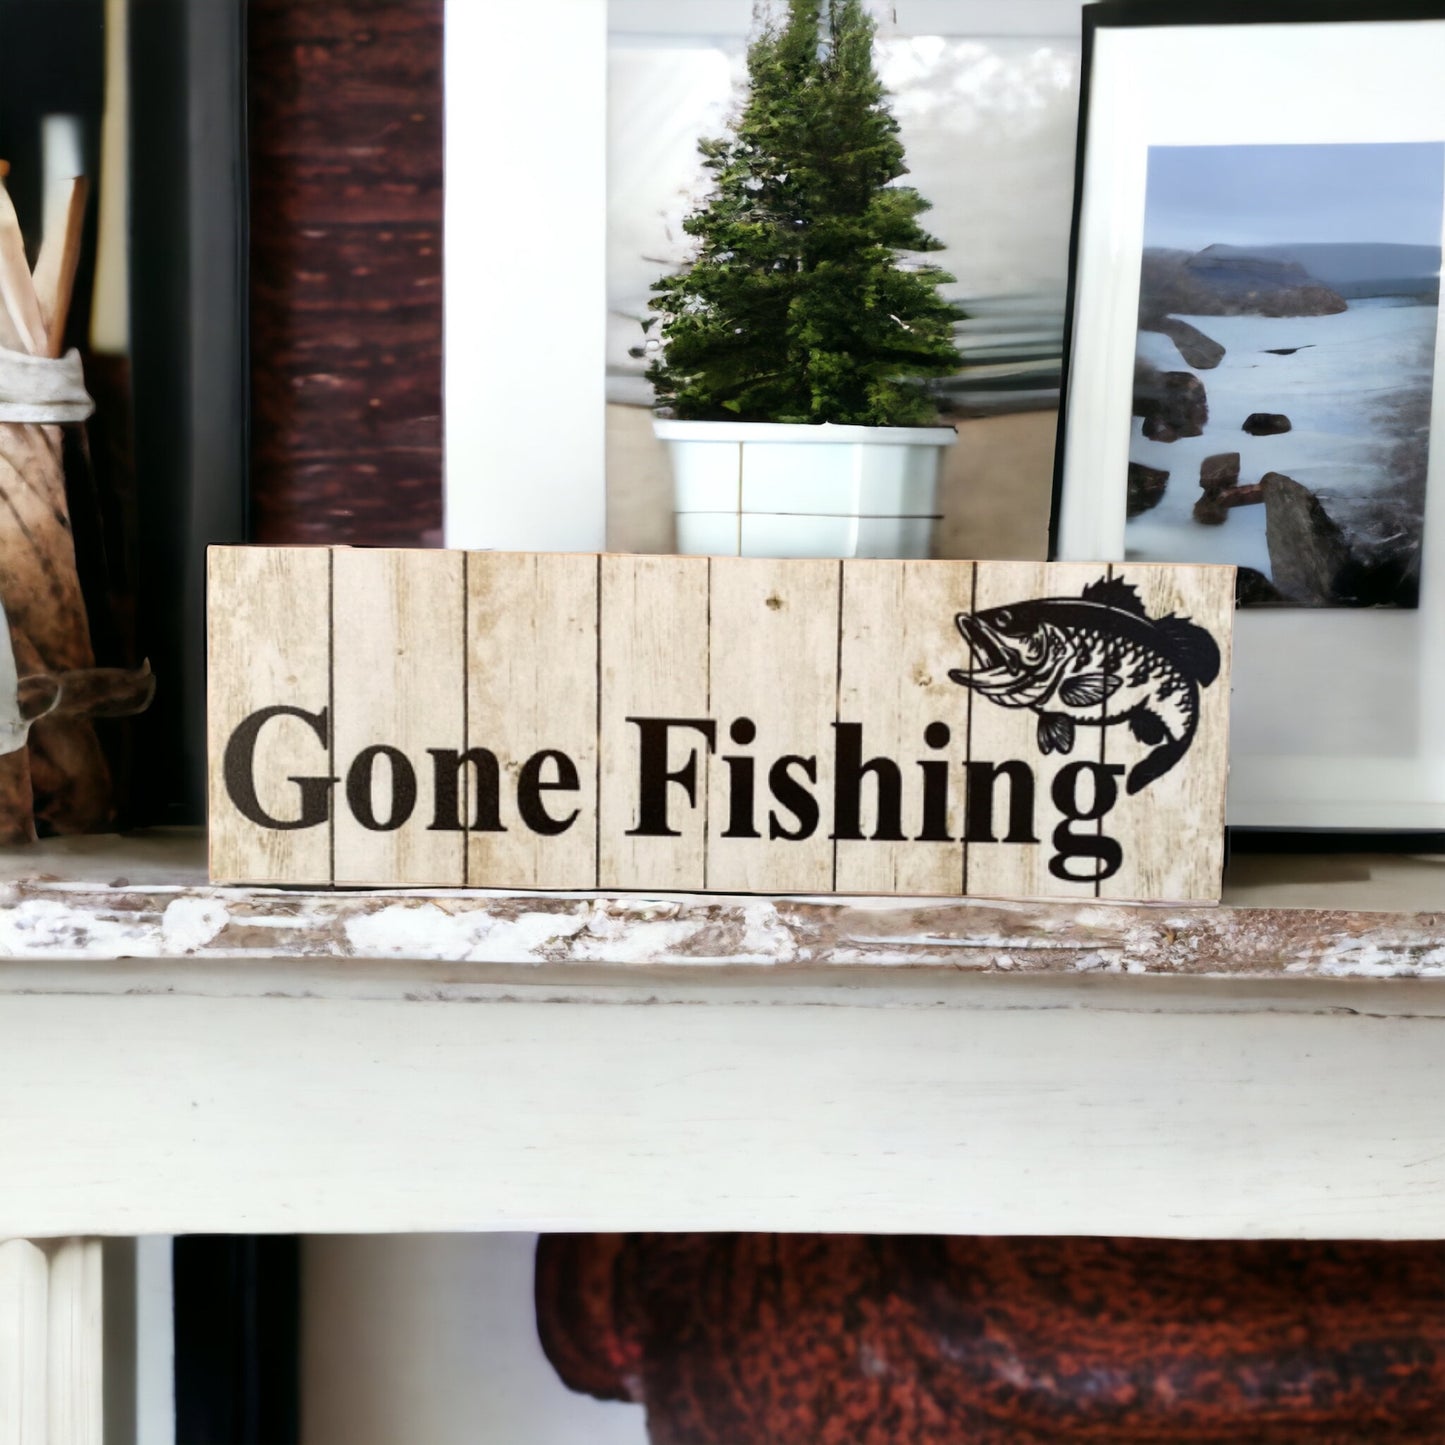 Gone Fishing with Bass Fish Sign